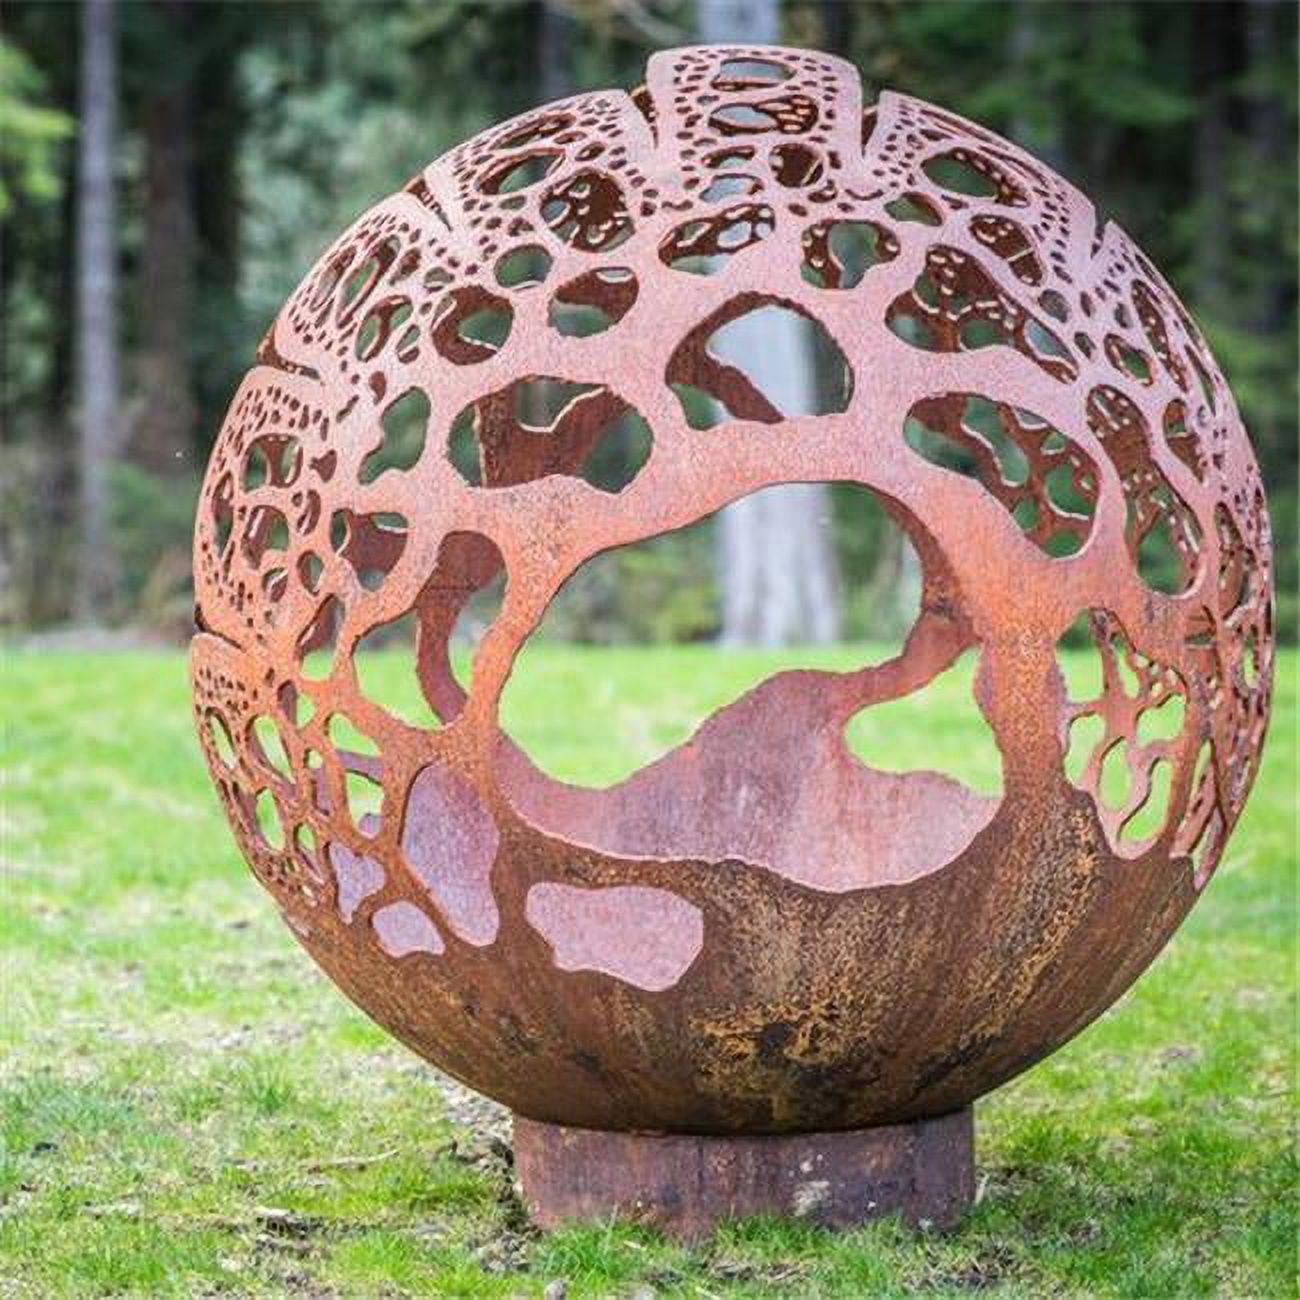 30002 Coral Dome Fire Pit - Wood Burning